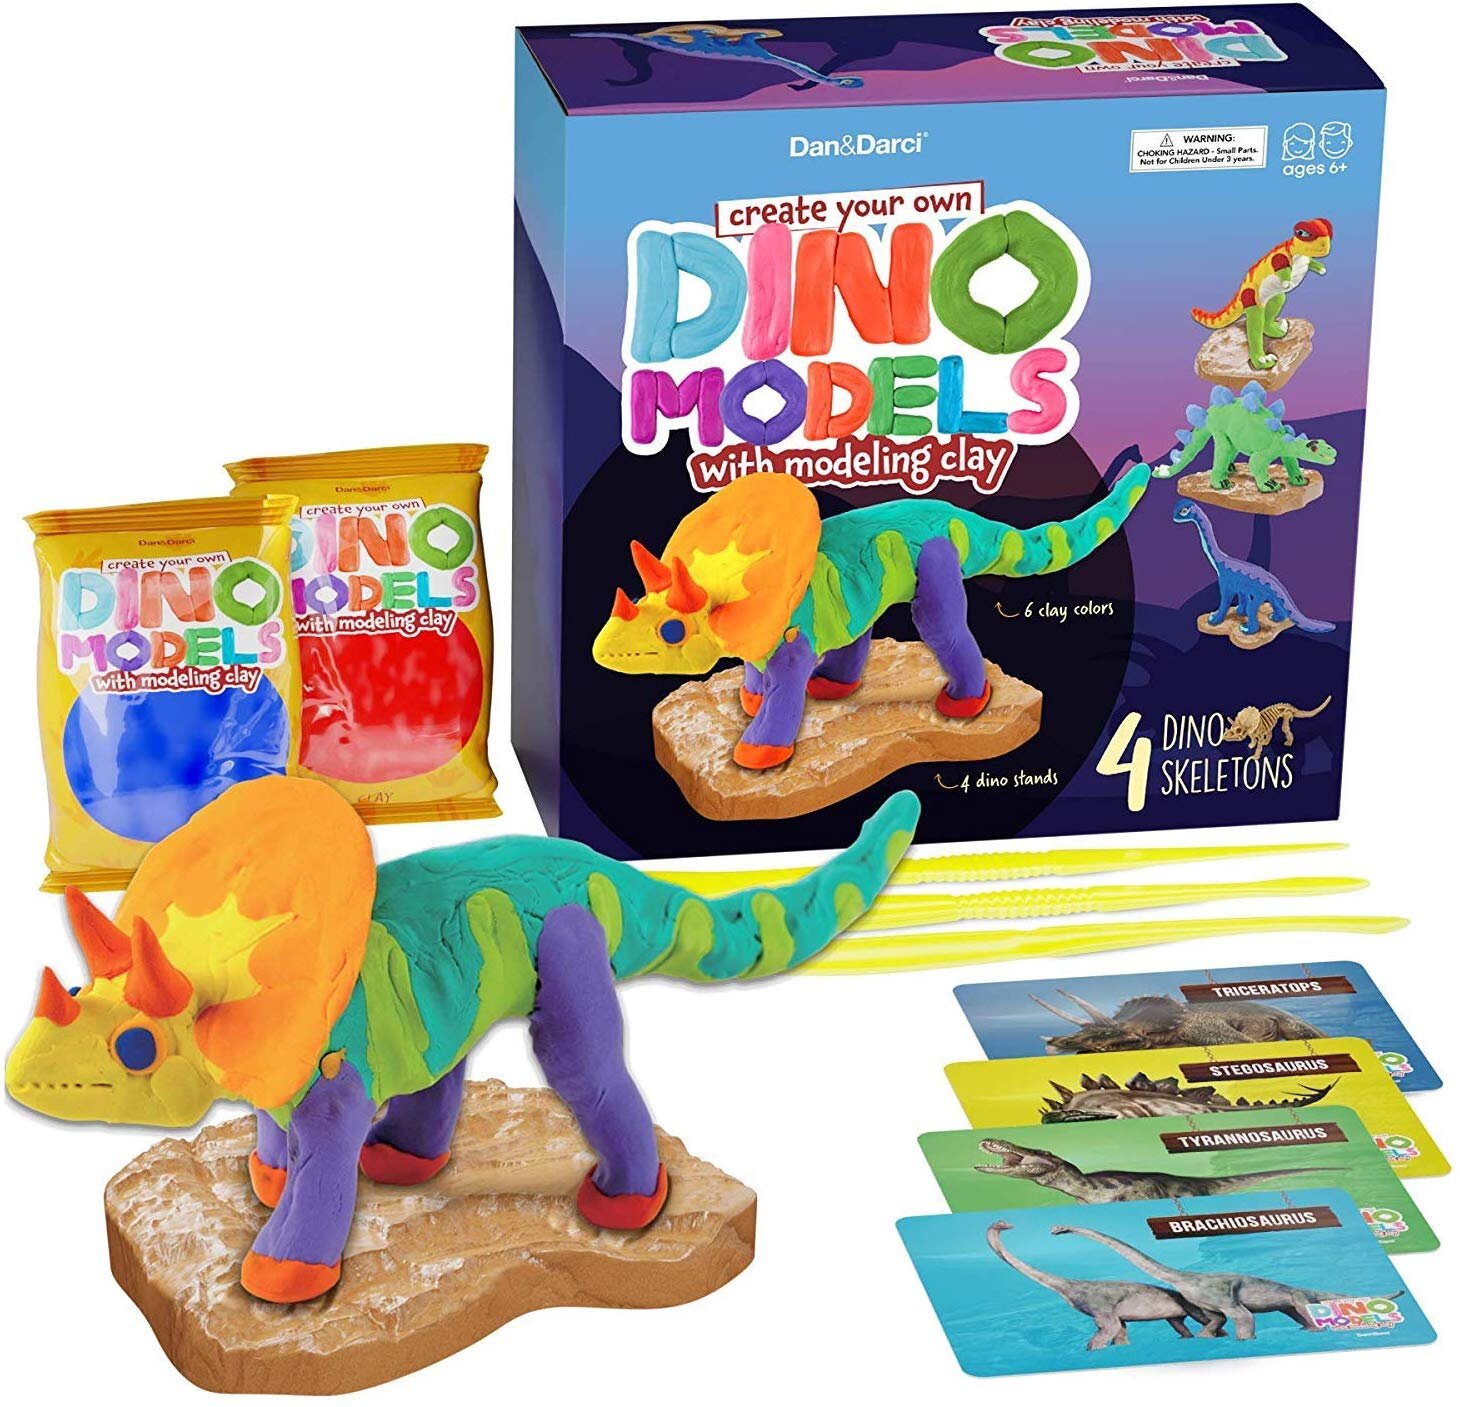 Create your own Dino Models with Modeling Clay — Dan&Darci